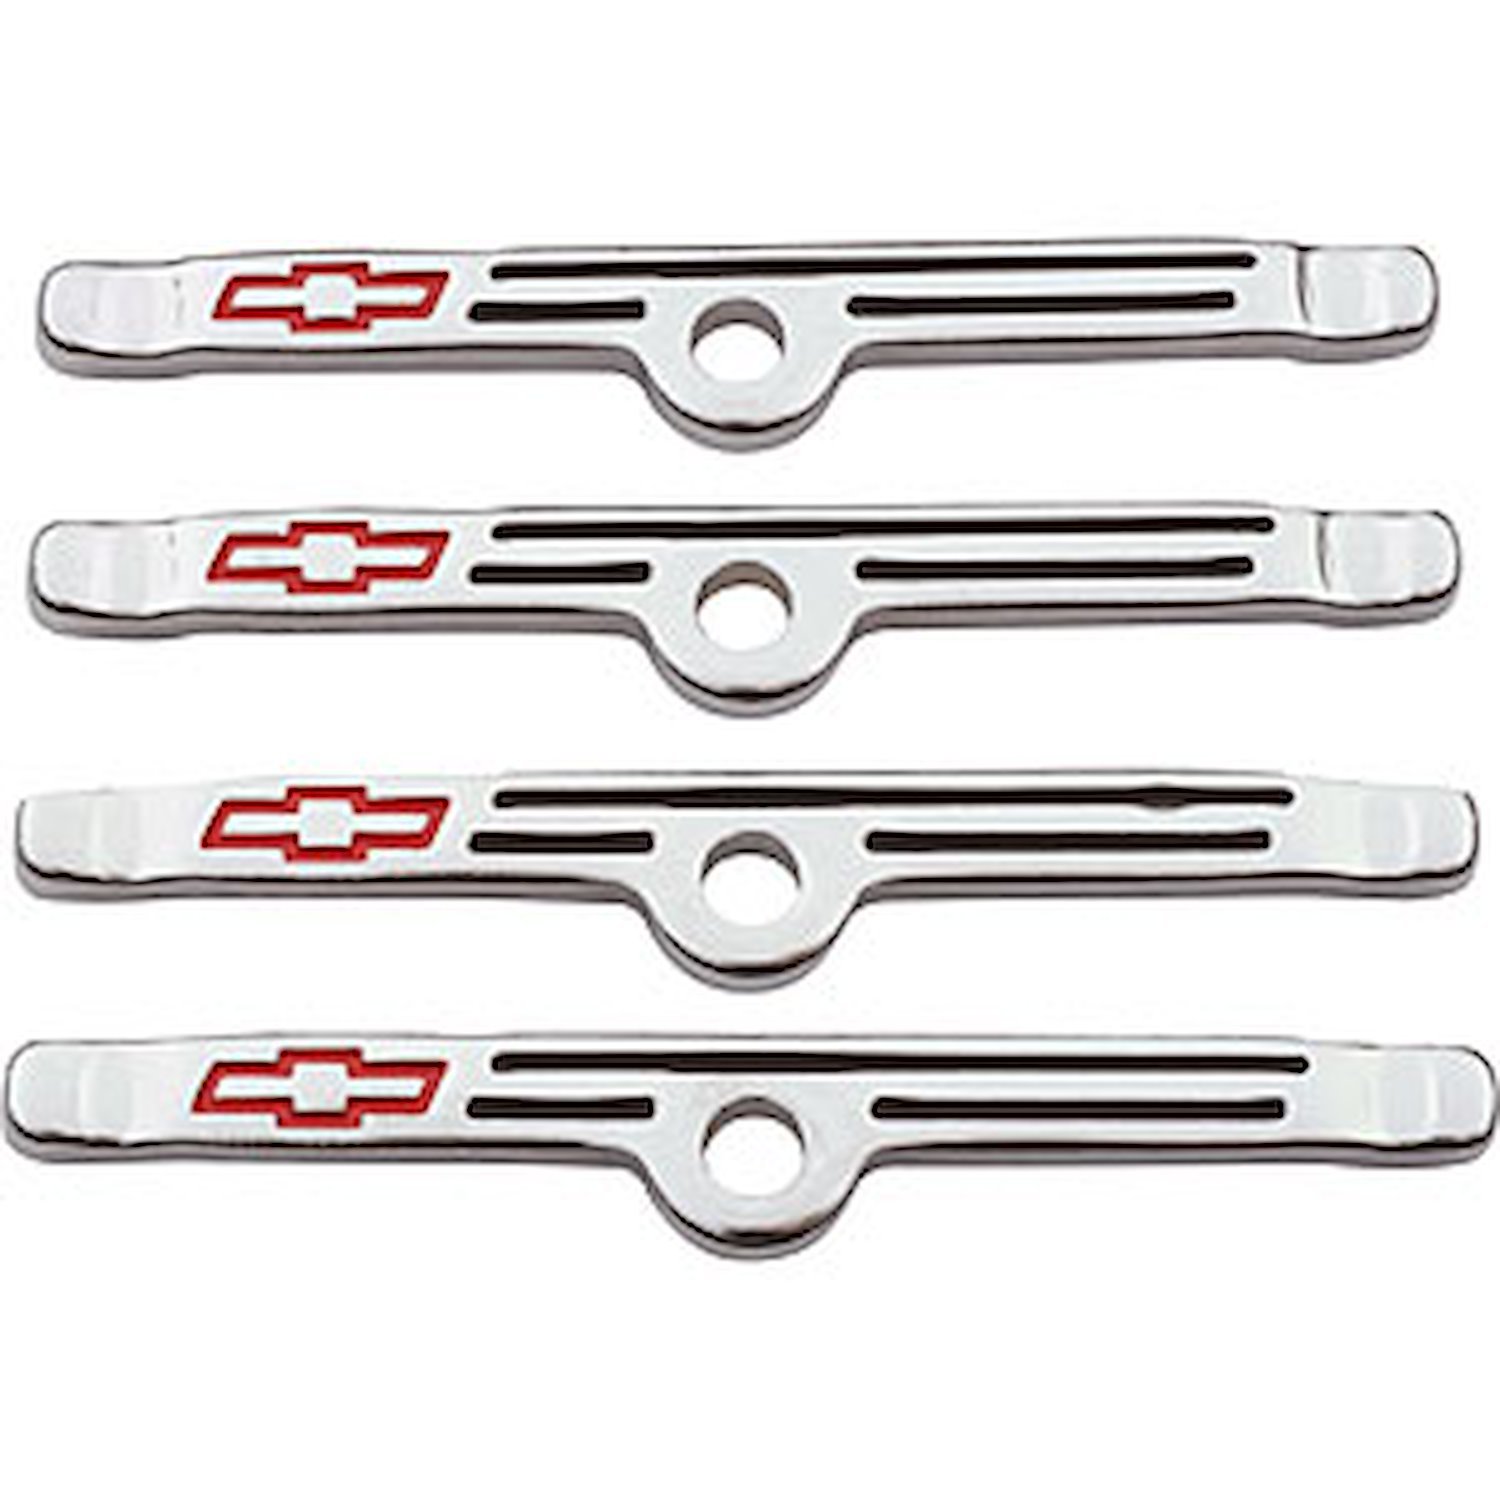 Bowtie Valve Cover Hold-Down Clamps for 1958-1986 Small